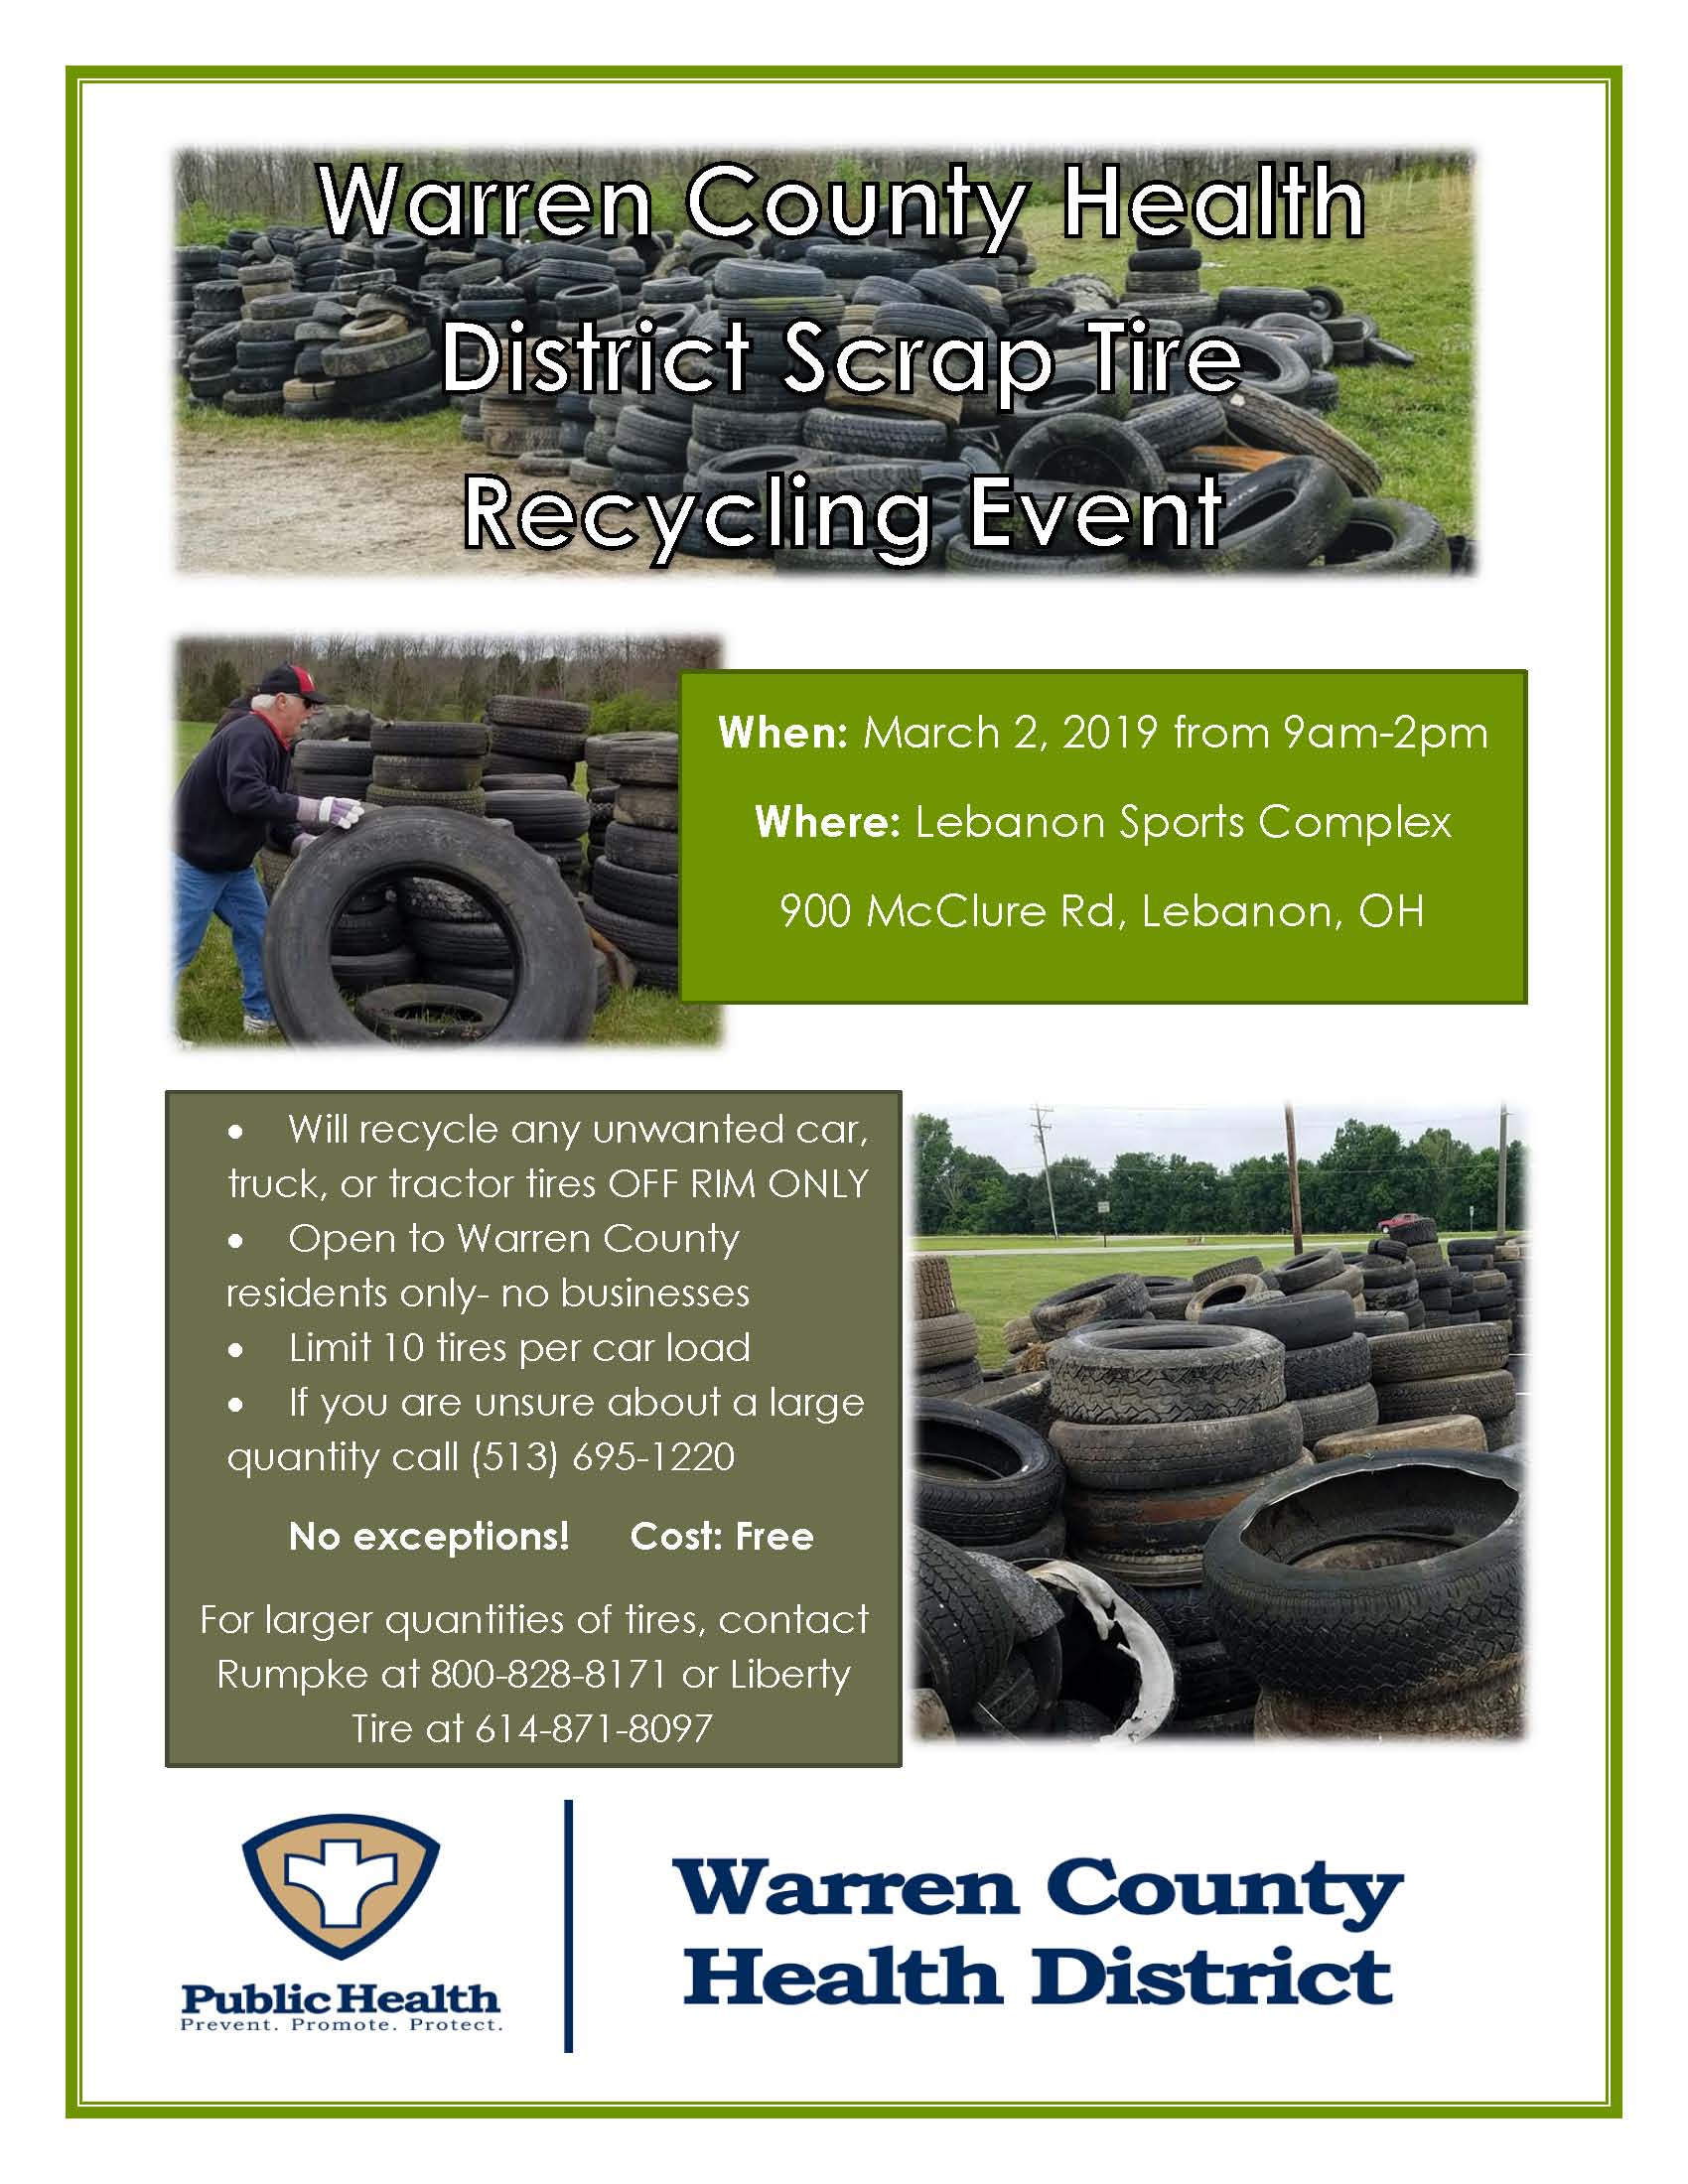 tire event flyer